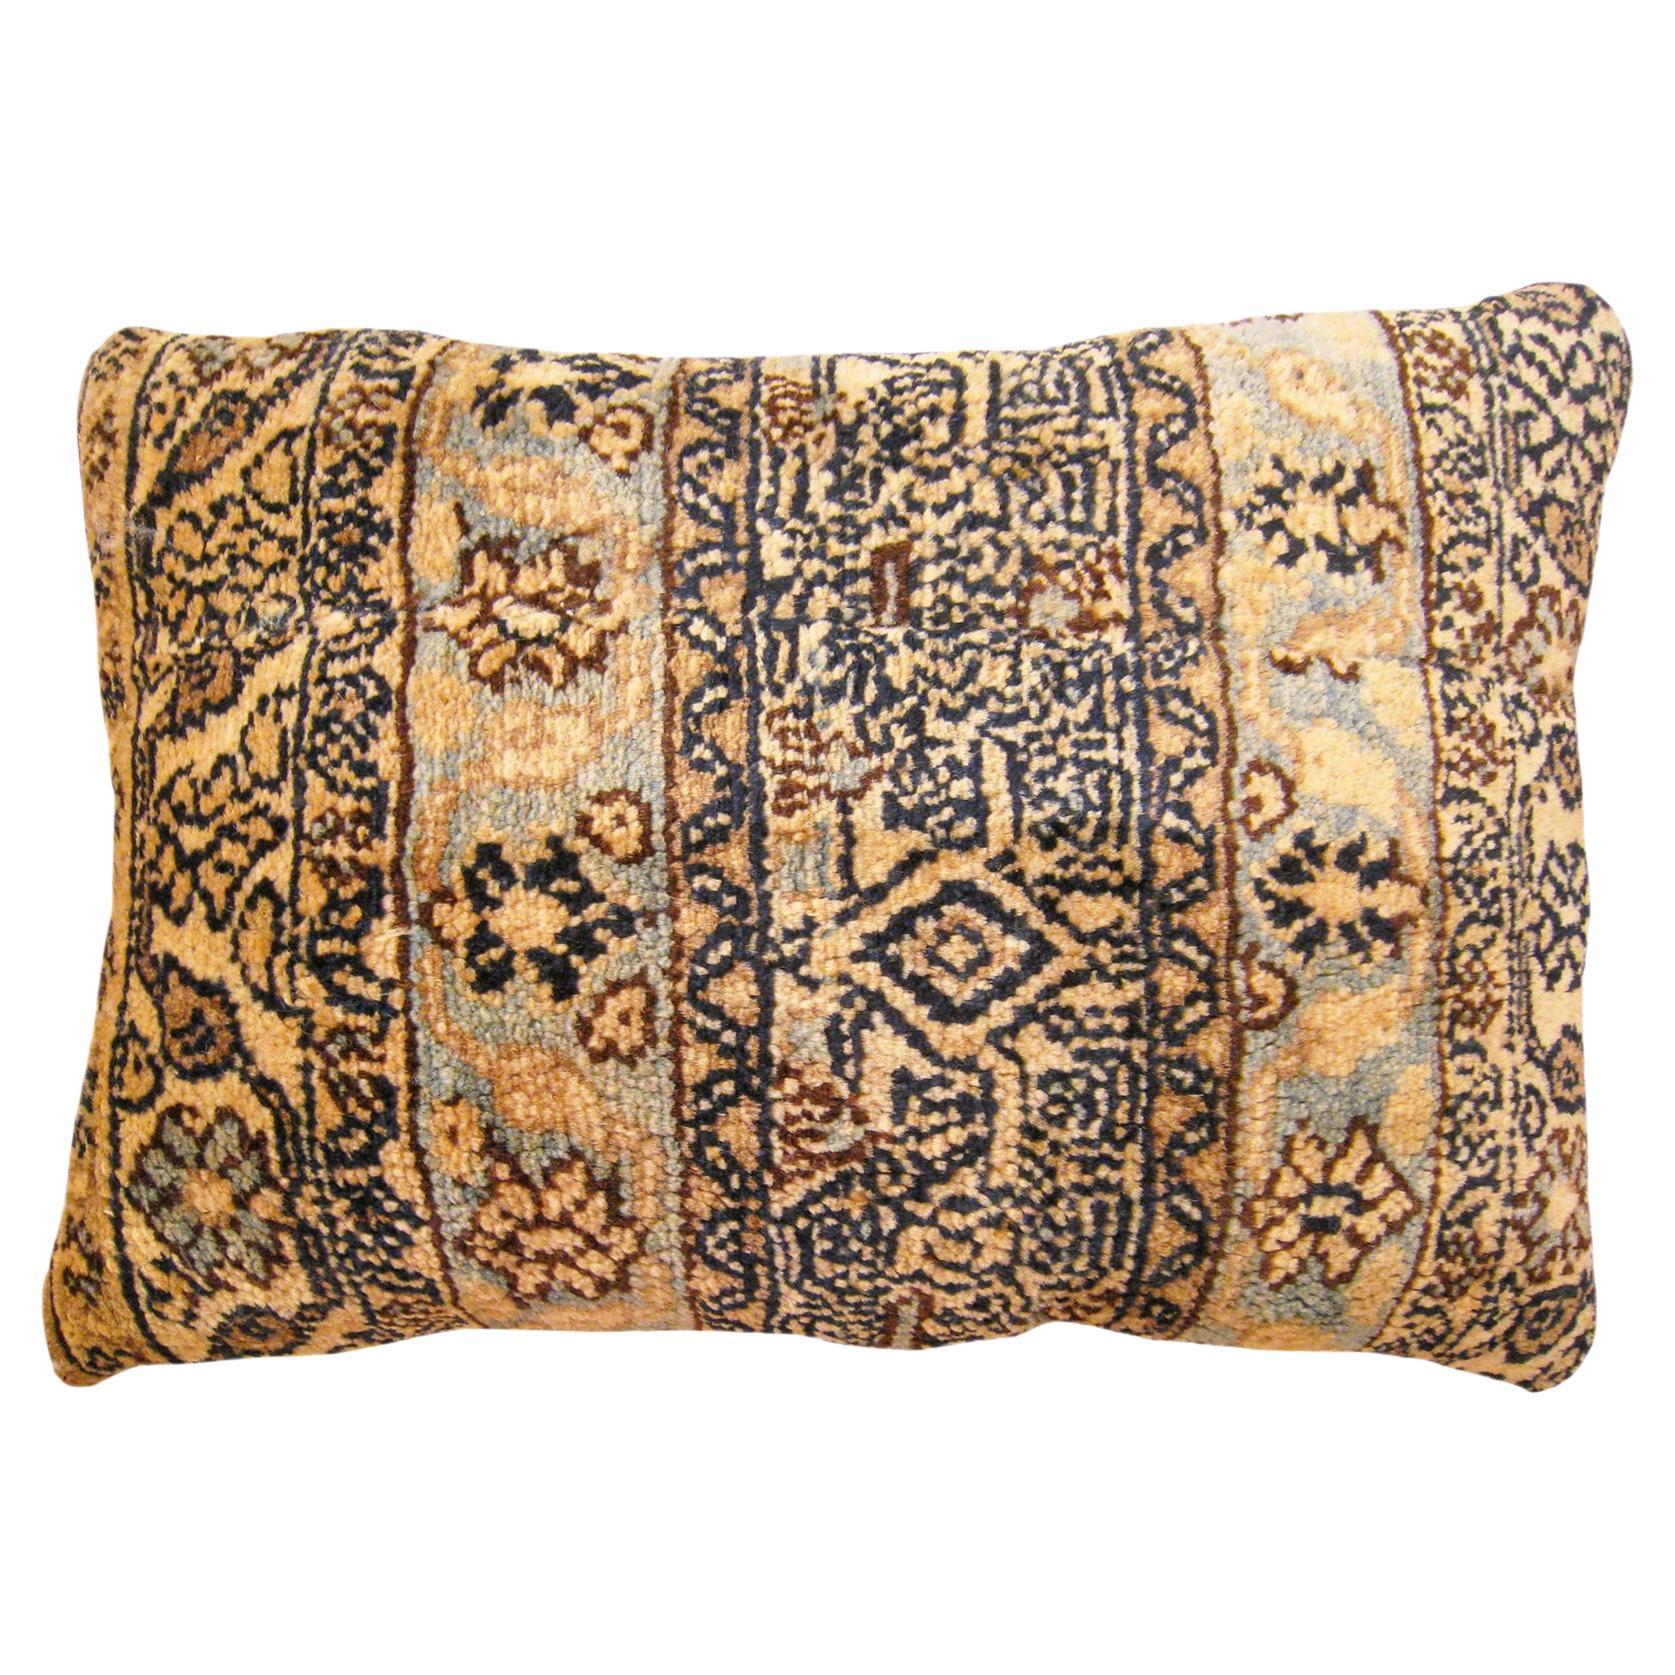  Decorative Antique Persian Hamadan Rug Pillow with Floral Elements Allover For Sale